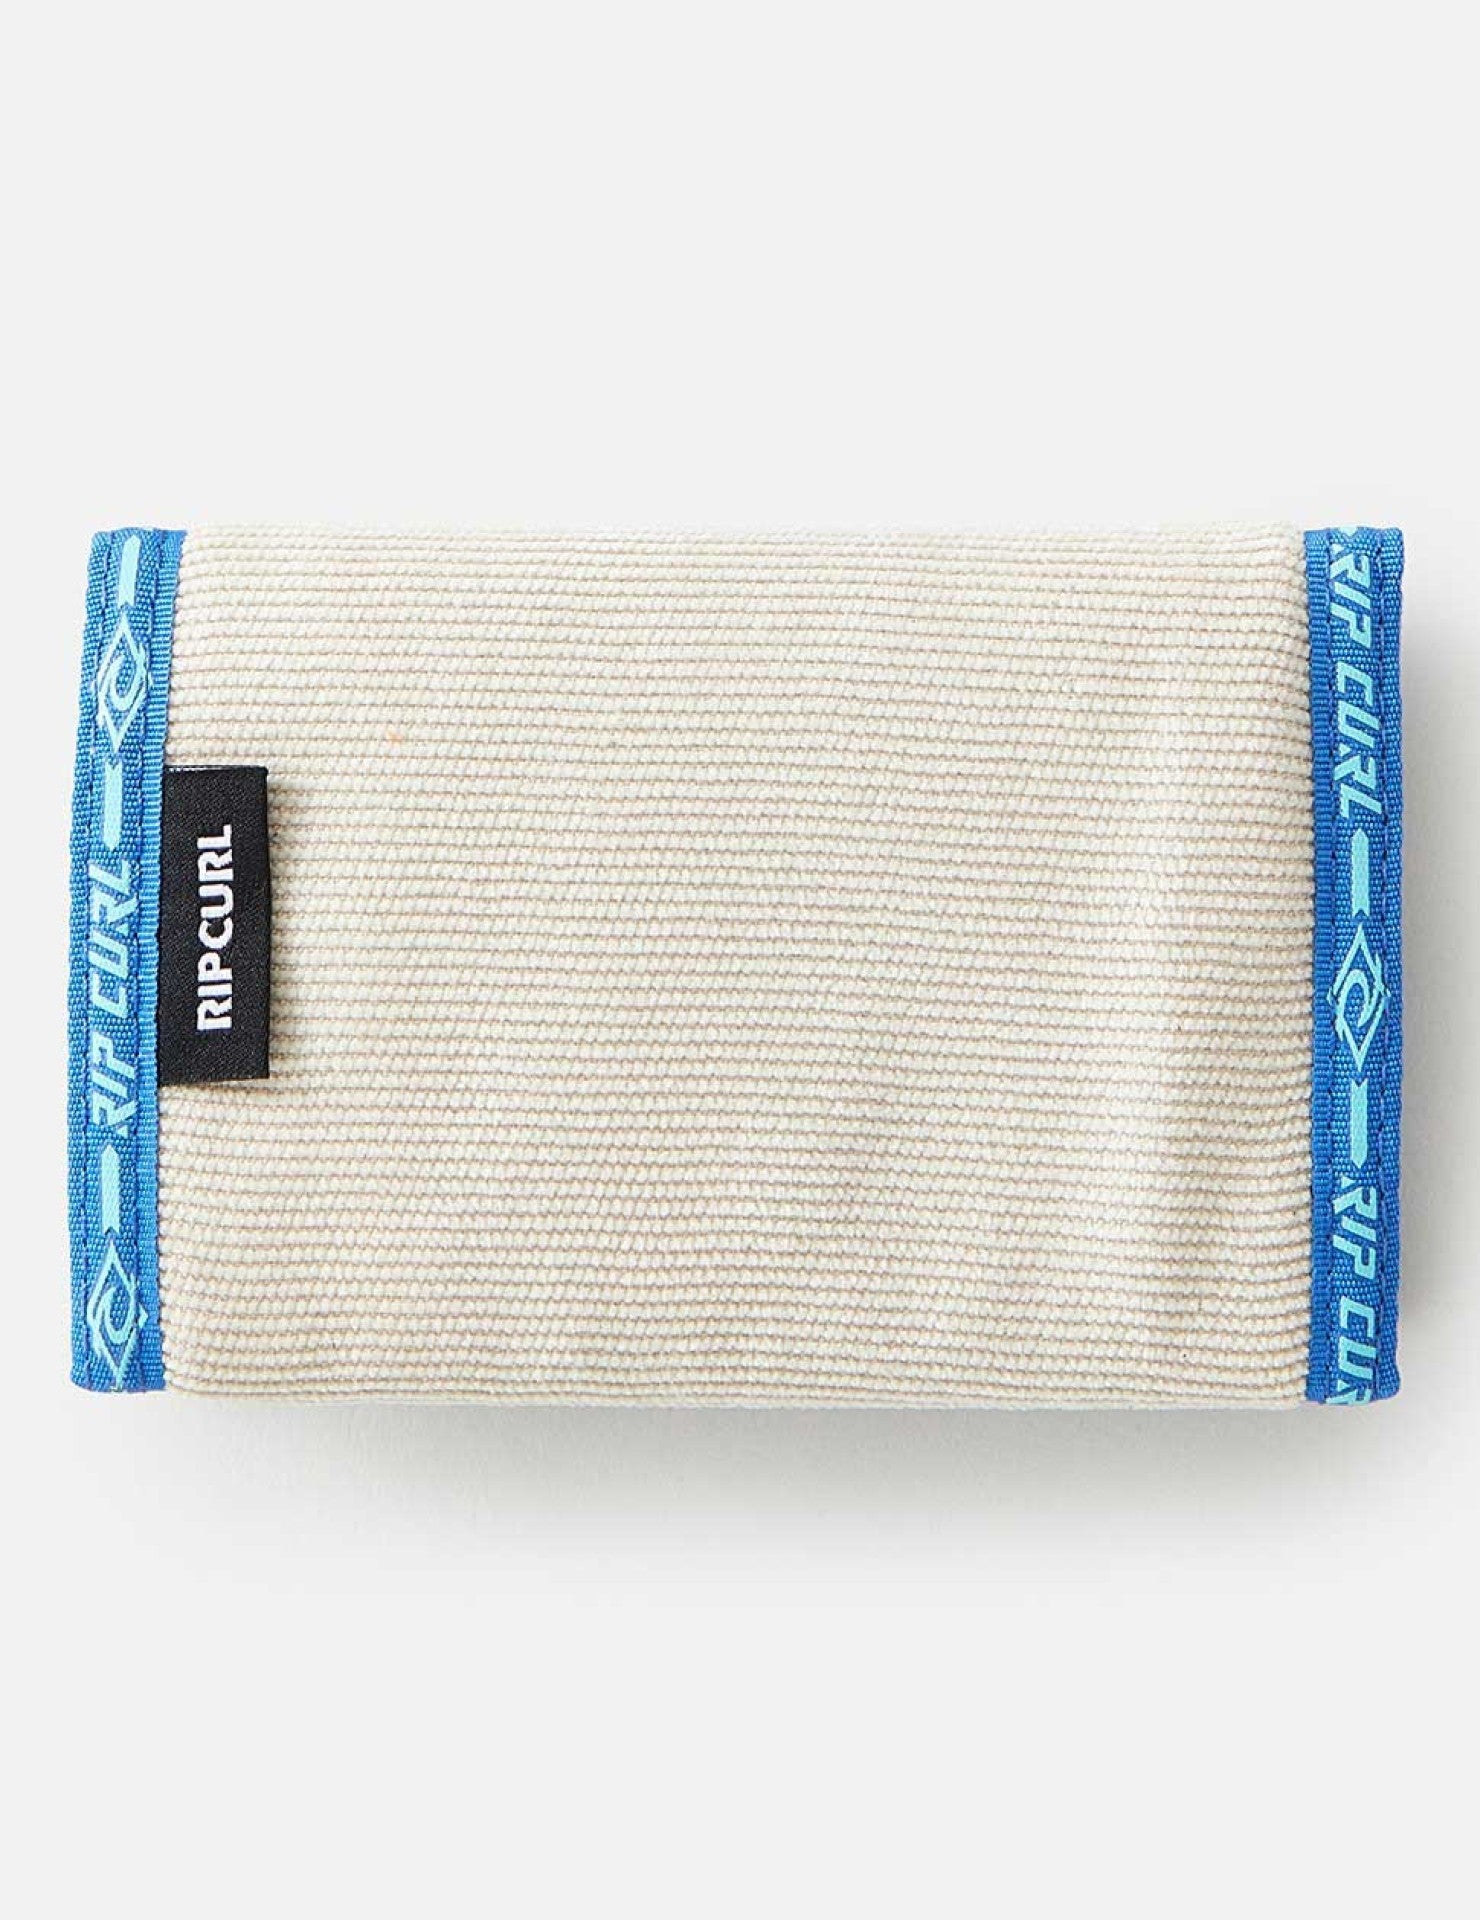 ARCHIVE CORD SURF WALLET